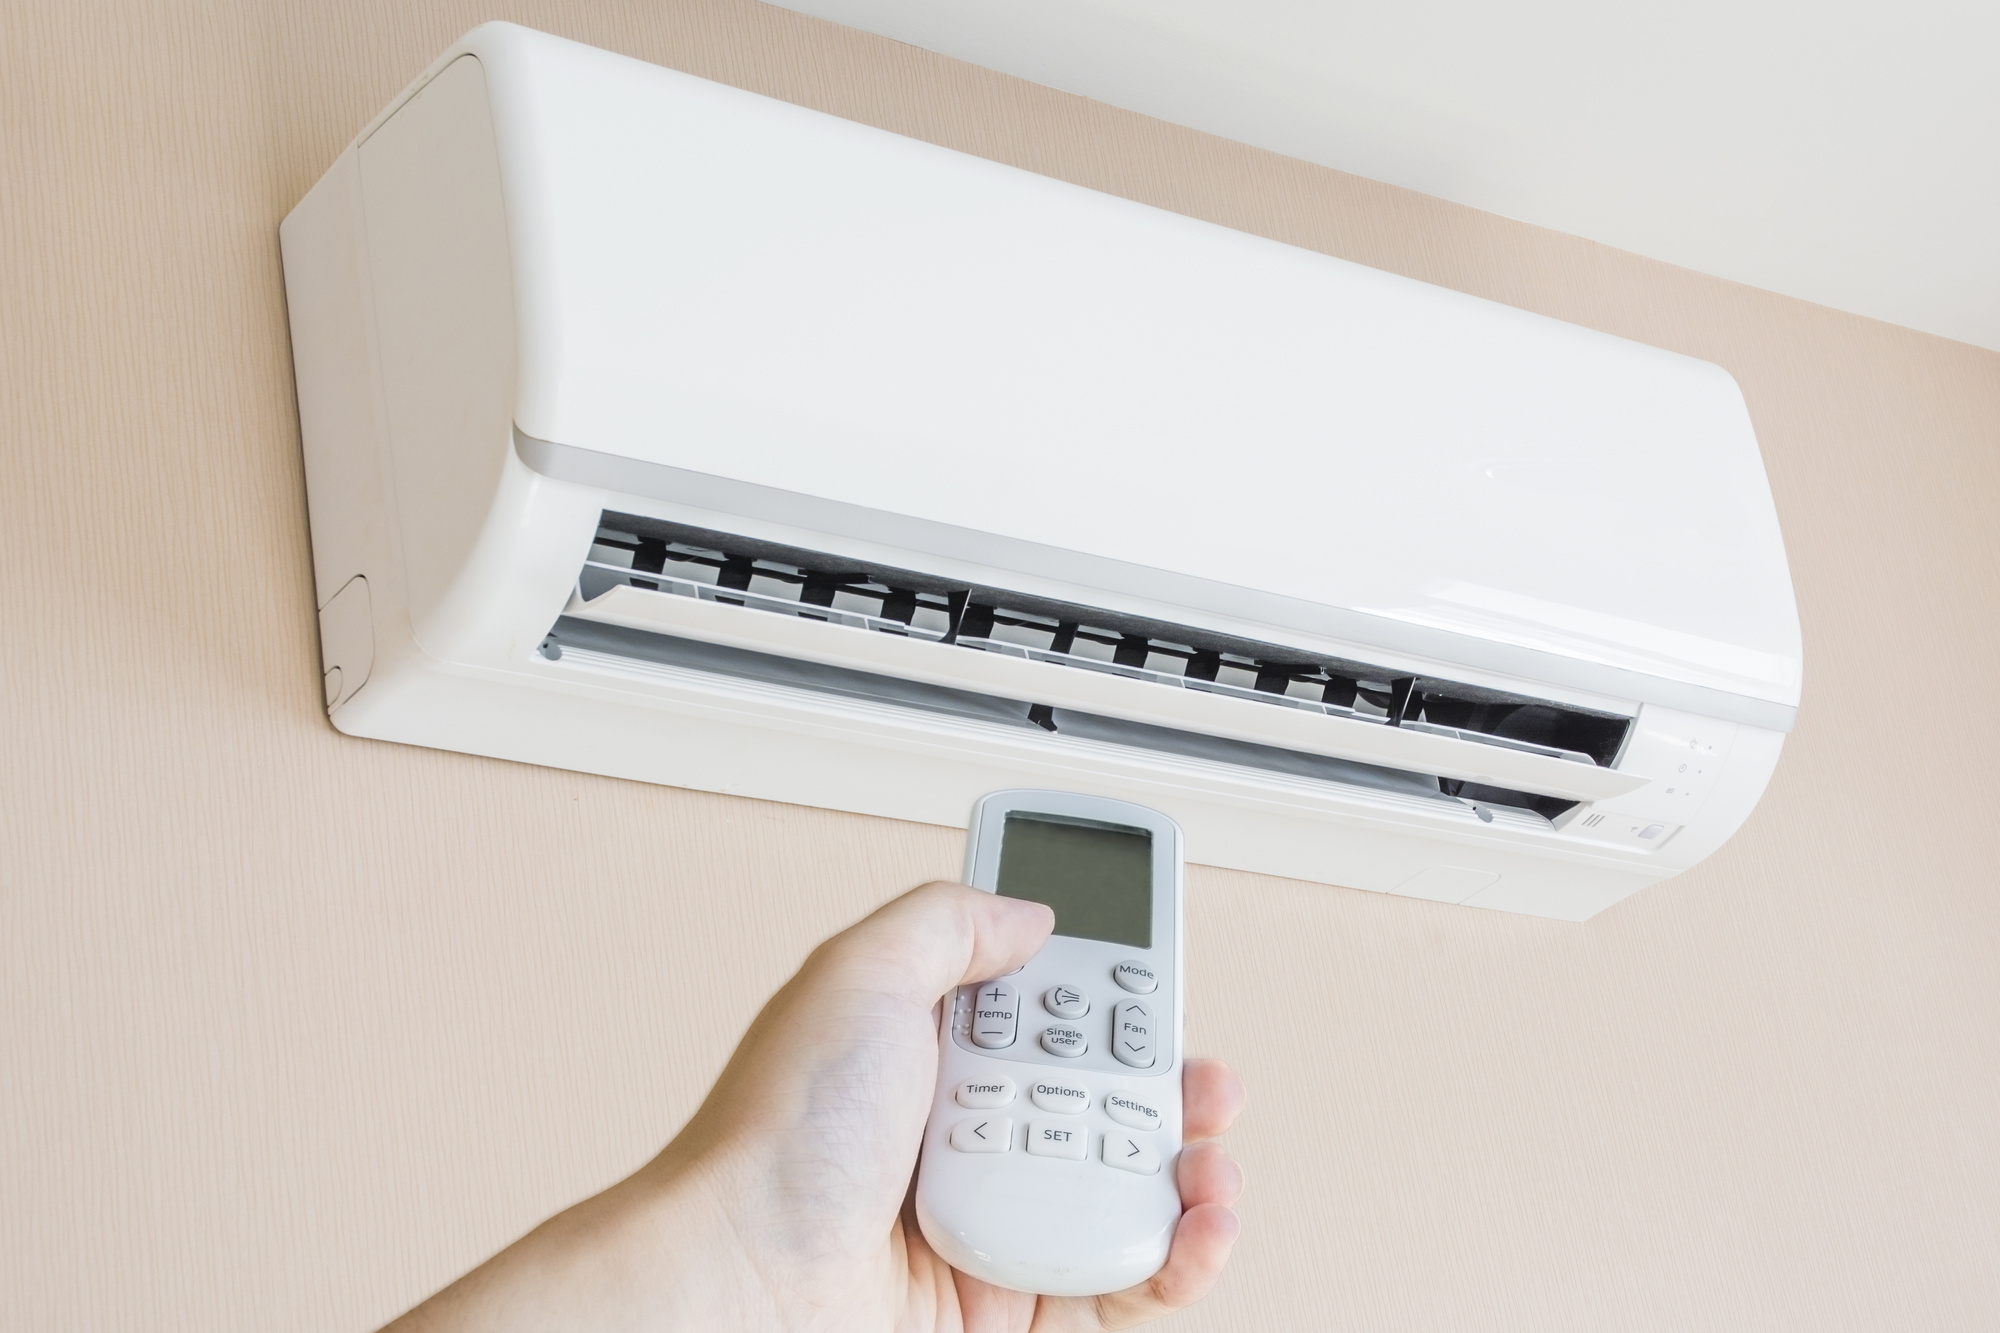 Consisting of two main parts that are located both inside and outside, click here to explore everything you need to know about a split air conditioner.